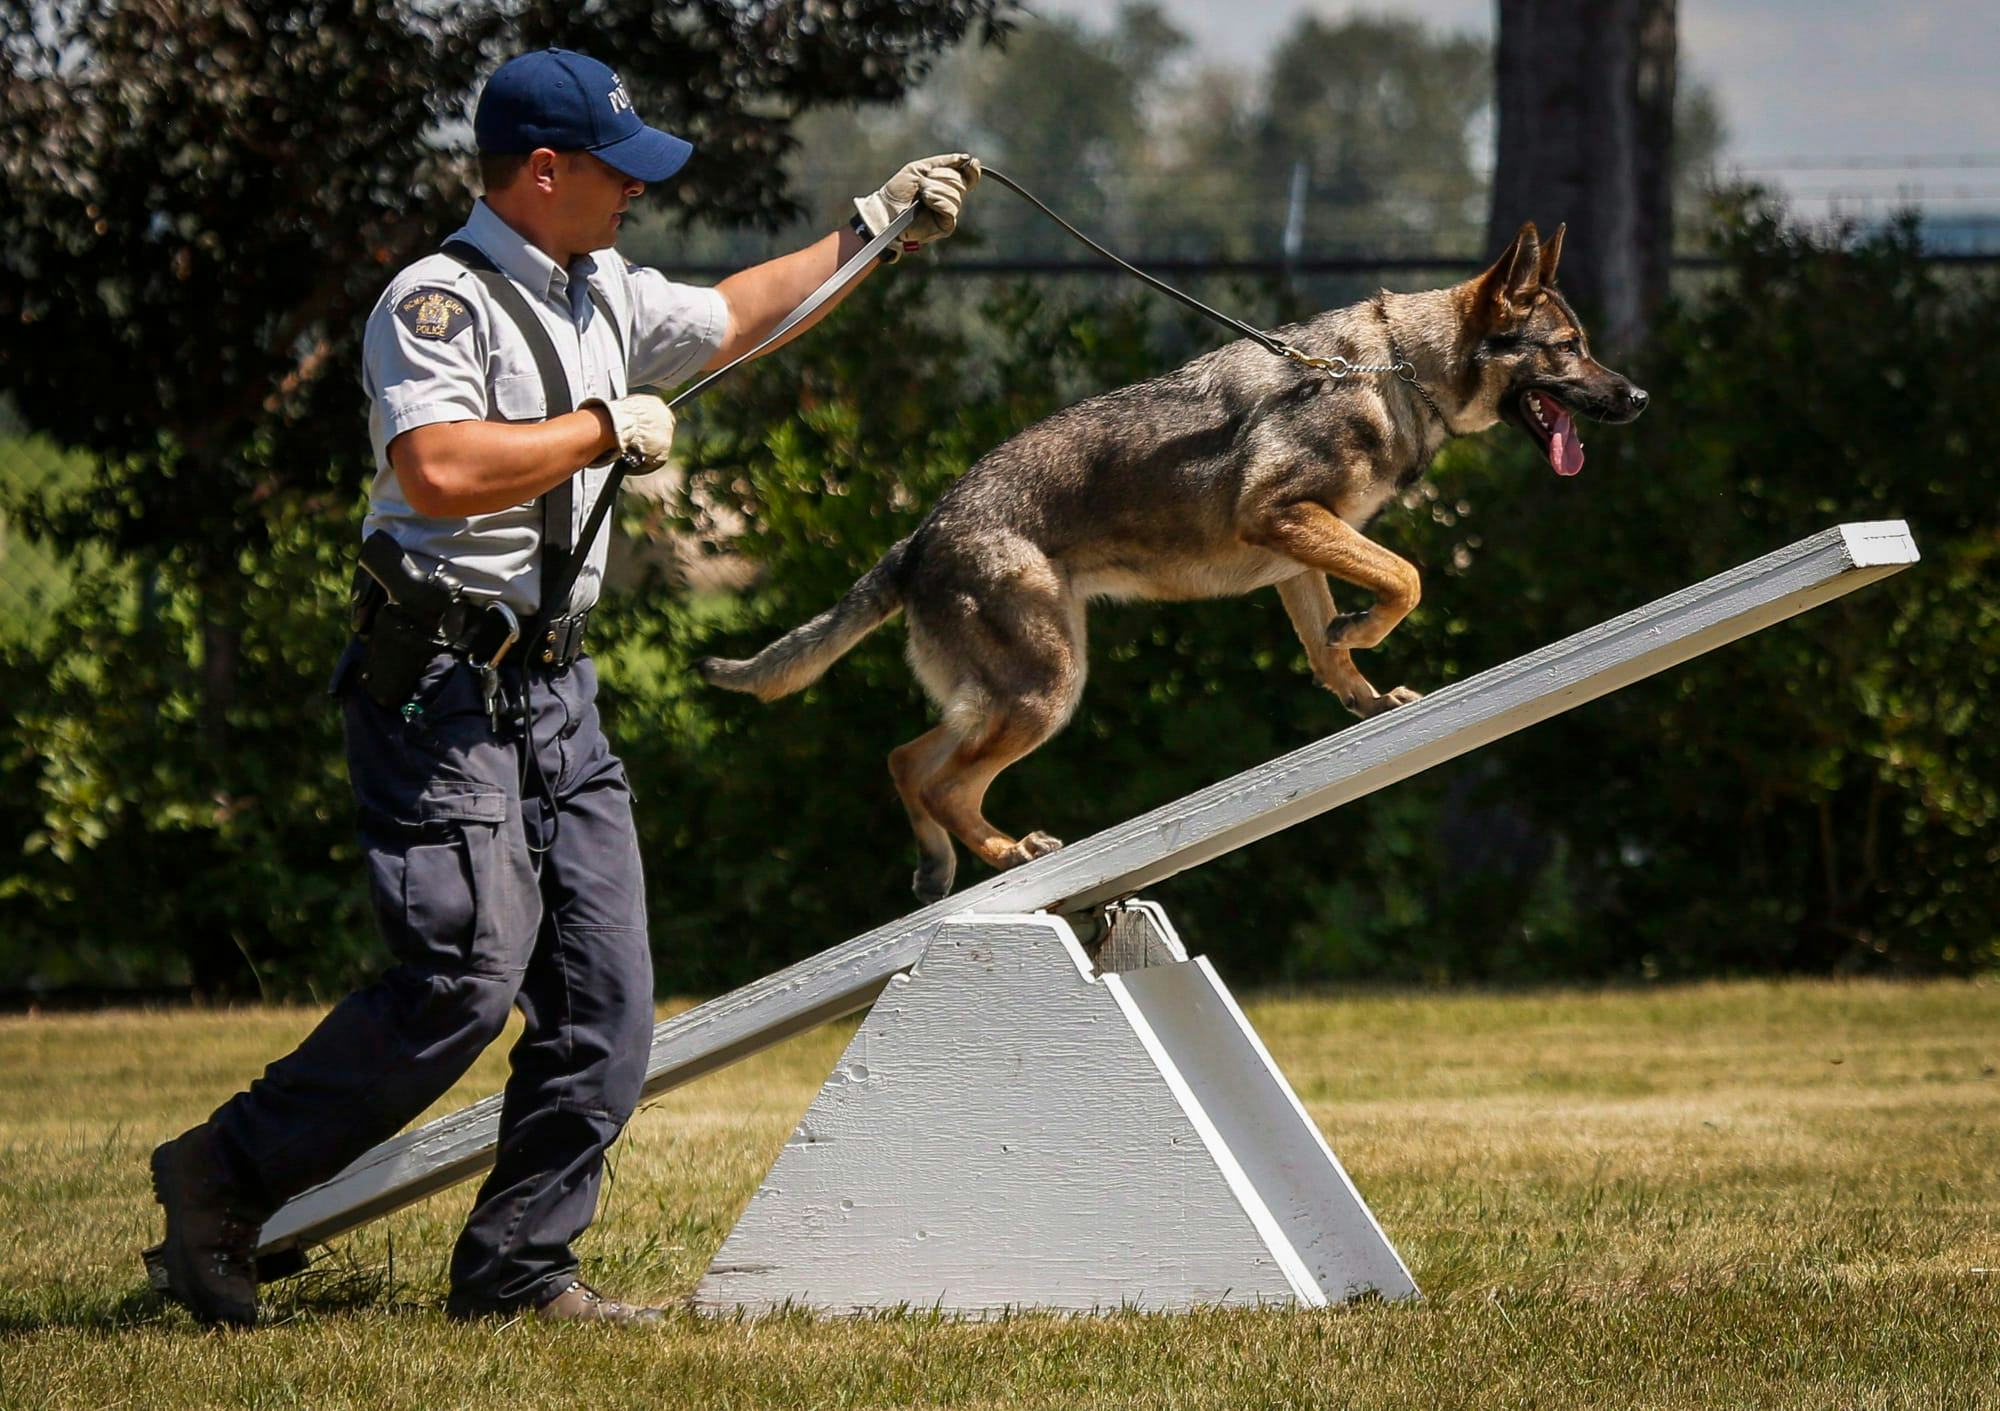 A constable leads a german shepherd up a teeter-totter on a police dog training obstacle course.